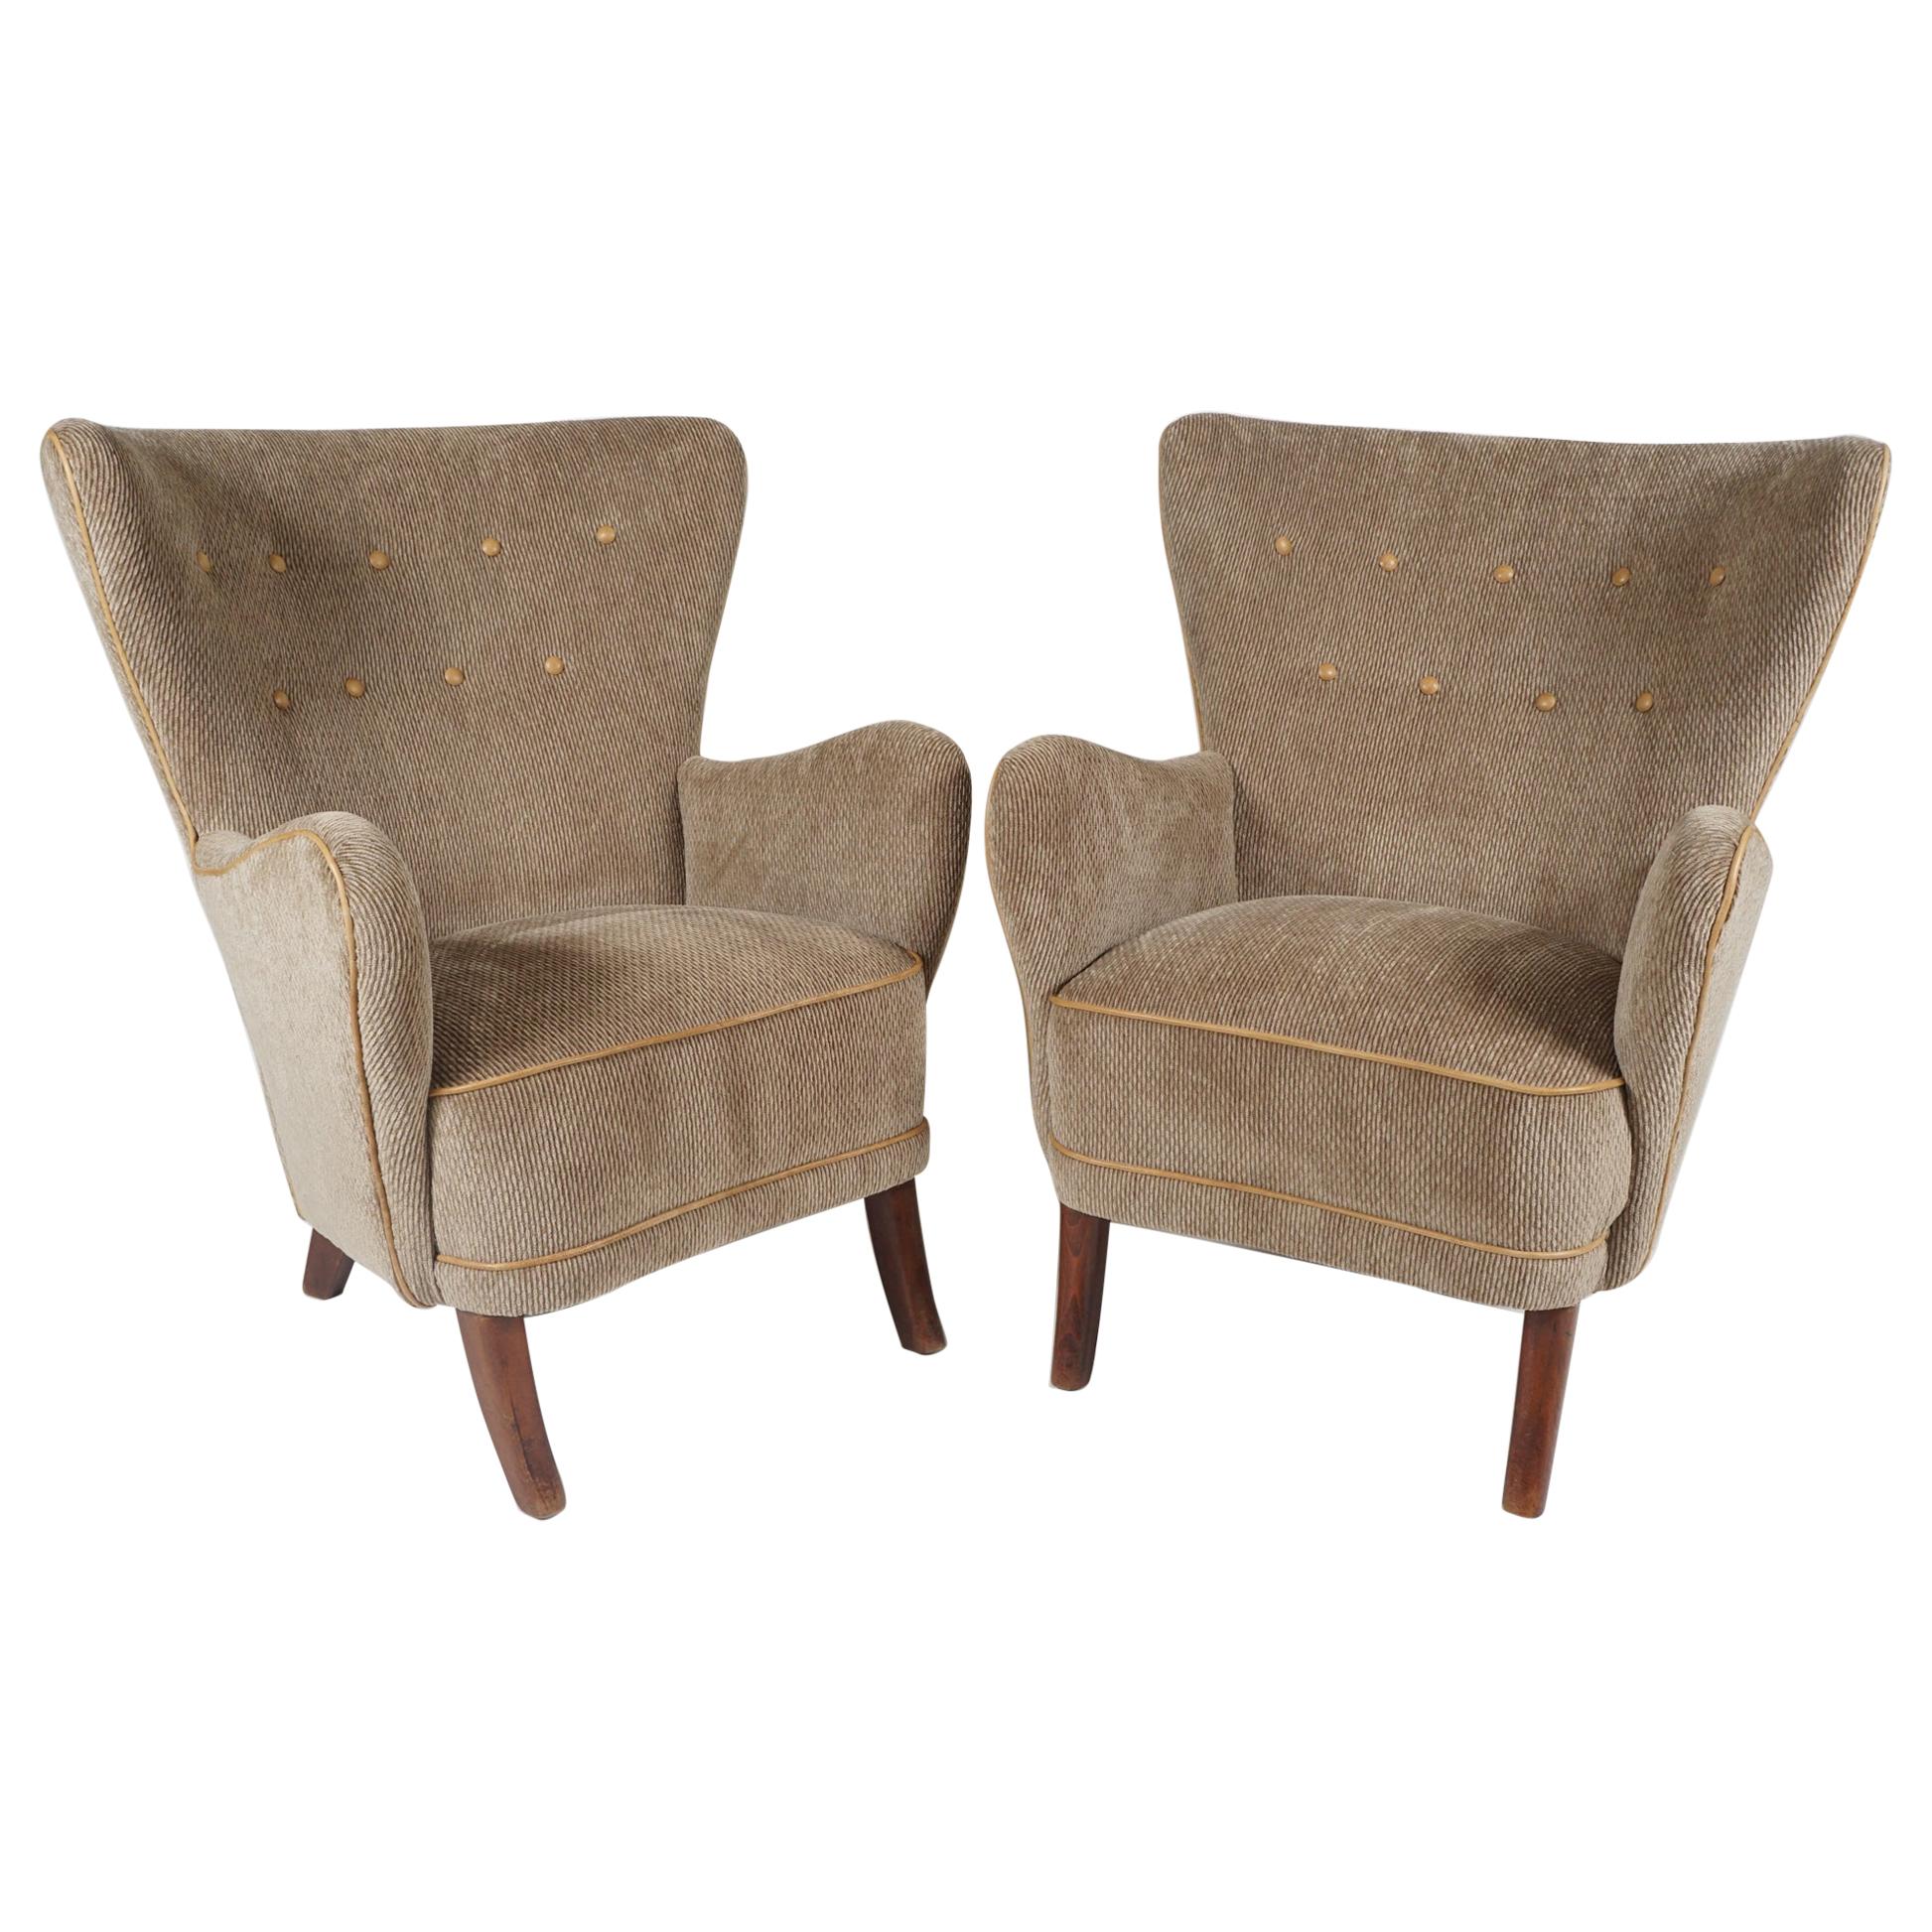 A pair of Danish modern armchairs by Danish designer Alfred Christensen. These are a contrast to
his well-known 'open arm' armchairs in that they are fully upholstered. Very comfortable, high backed
with exaggerated arms, newly upholstered in a